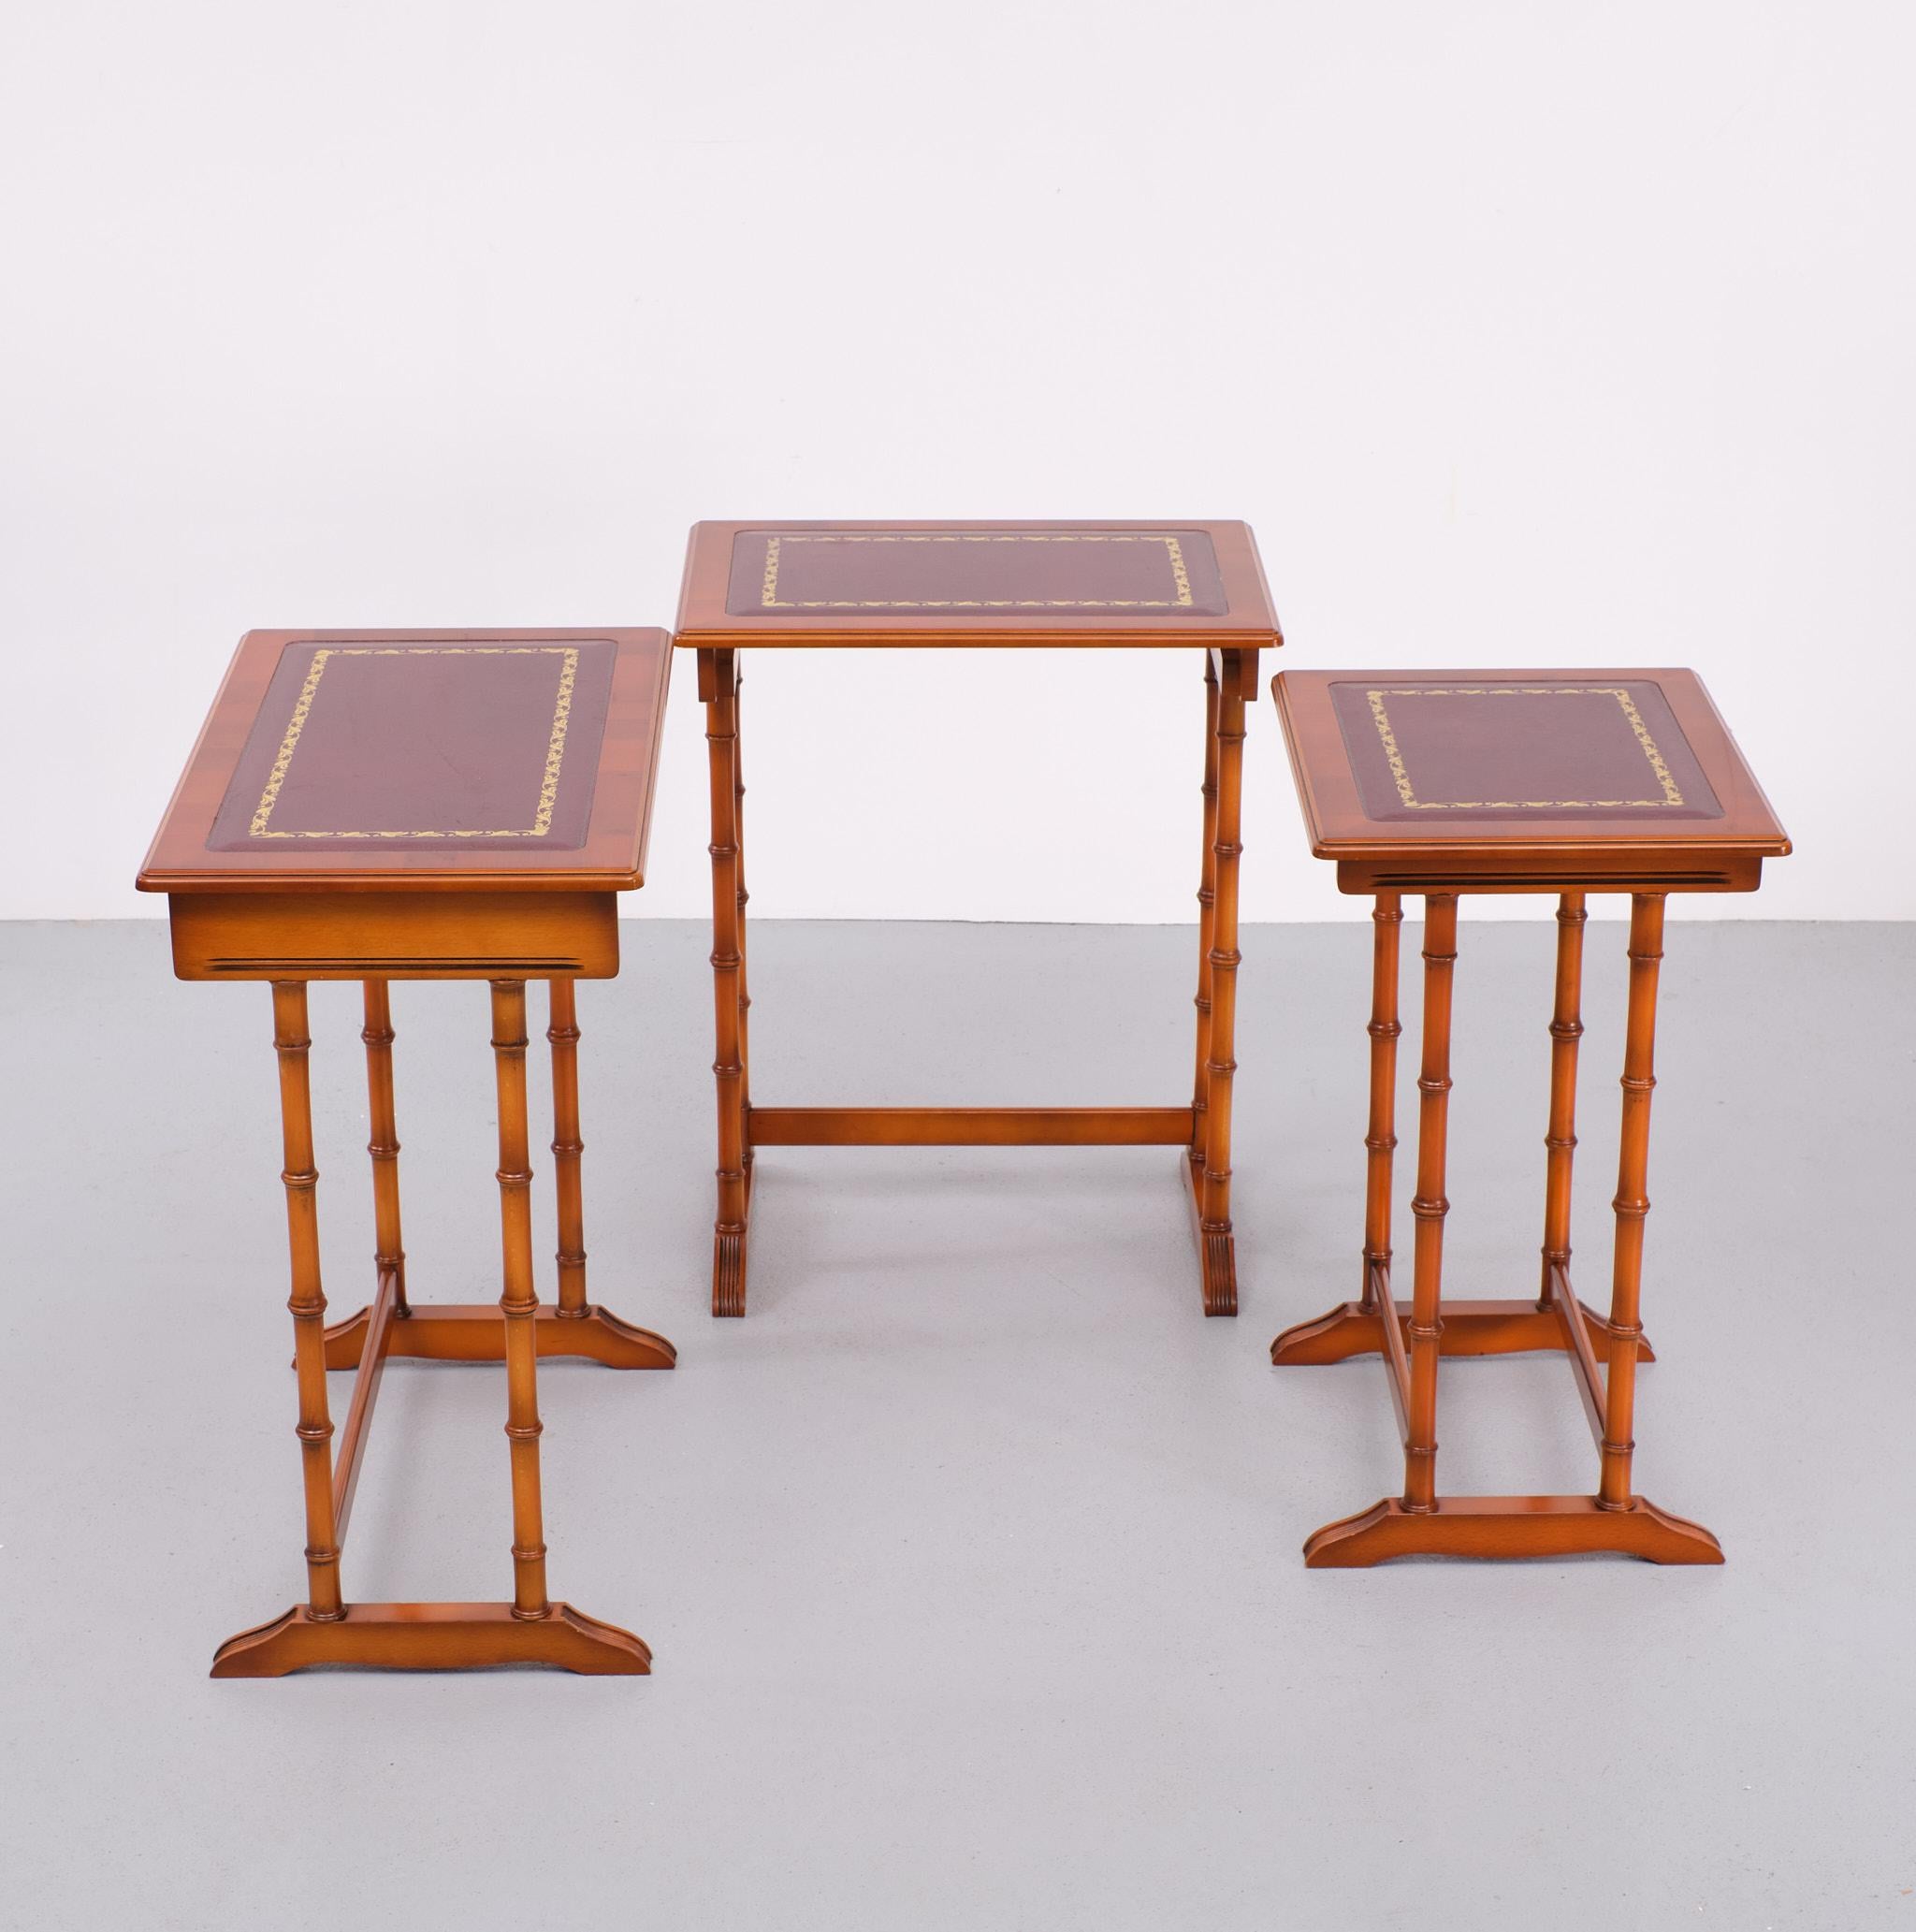   Exclusive English furniture  Cherry wood nesting tables  1970s  For Sale 5